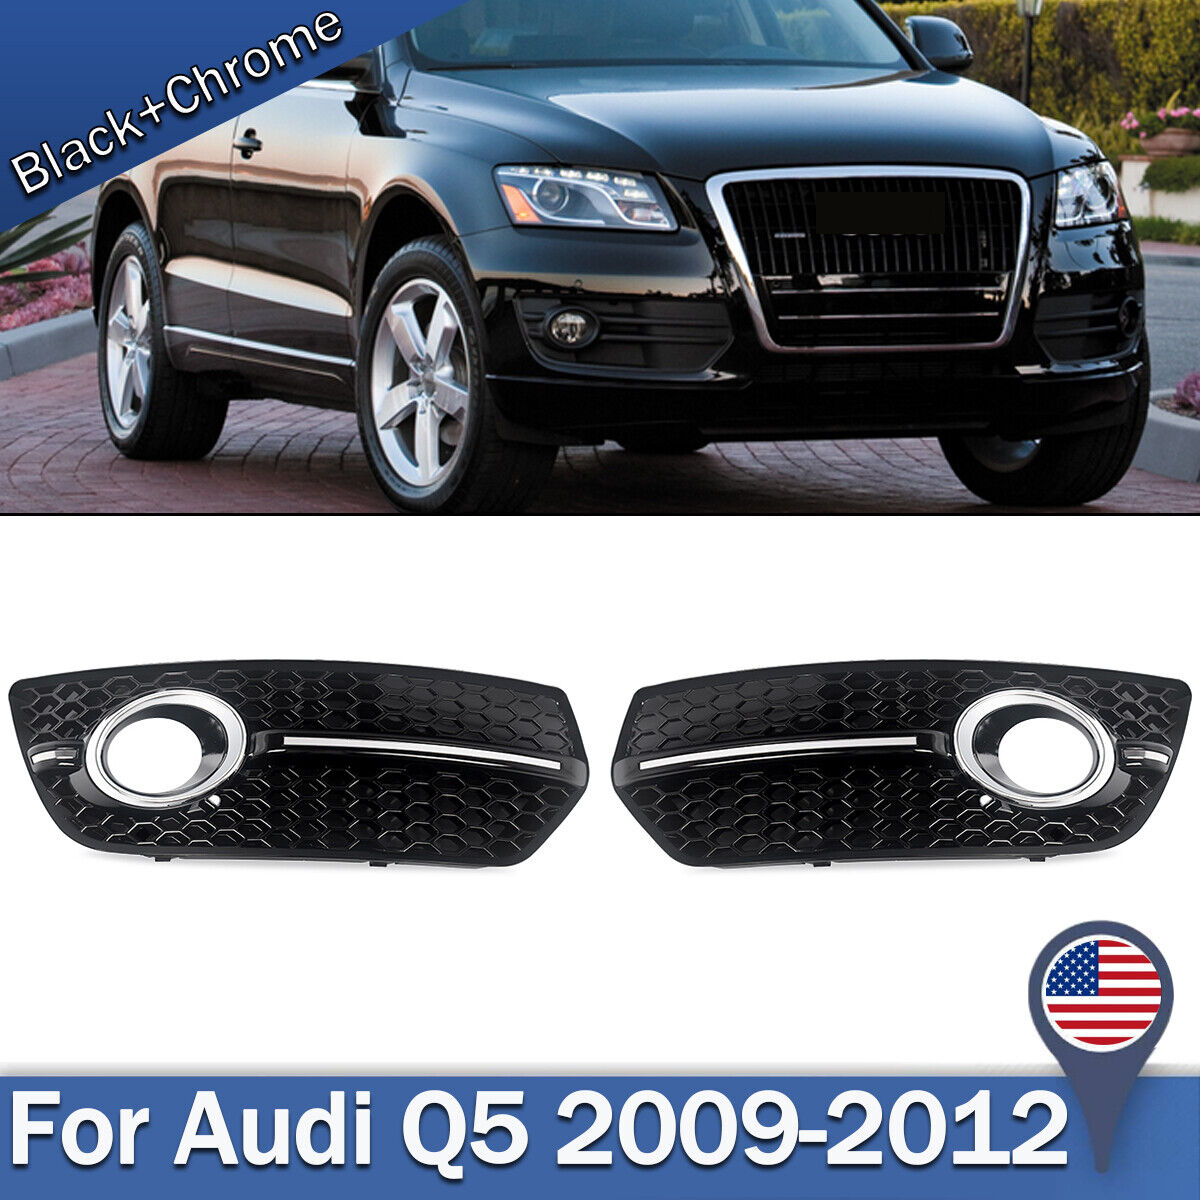 For 2009-2012 Audi Q5 Standard Front Fog Light Cover Grill Chrome Trim SQ5 Style